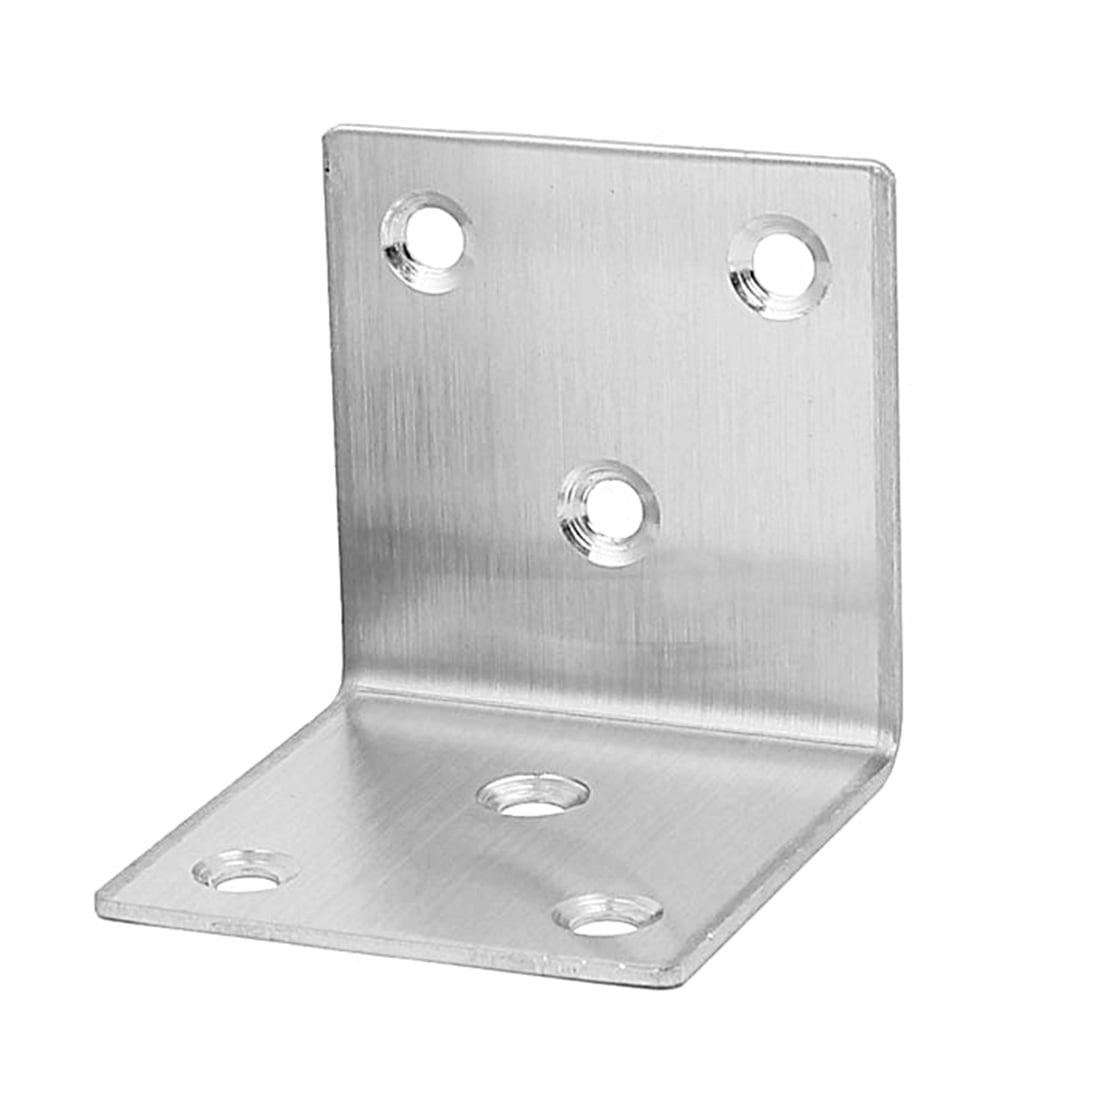 uxcell 51mmx51mmx50mm Stainless Steel Right Angle Brackets Holder Silver Tone 8pcs 